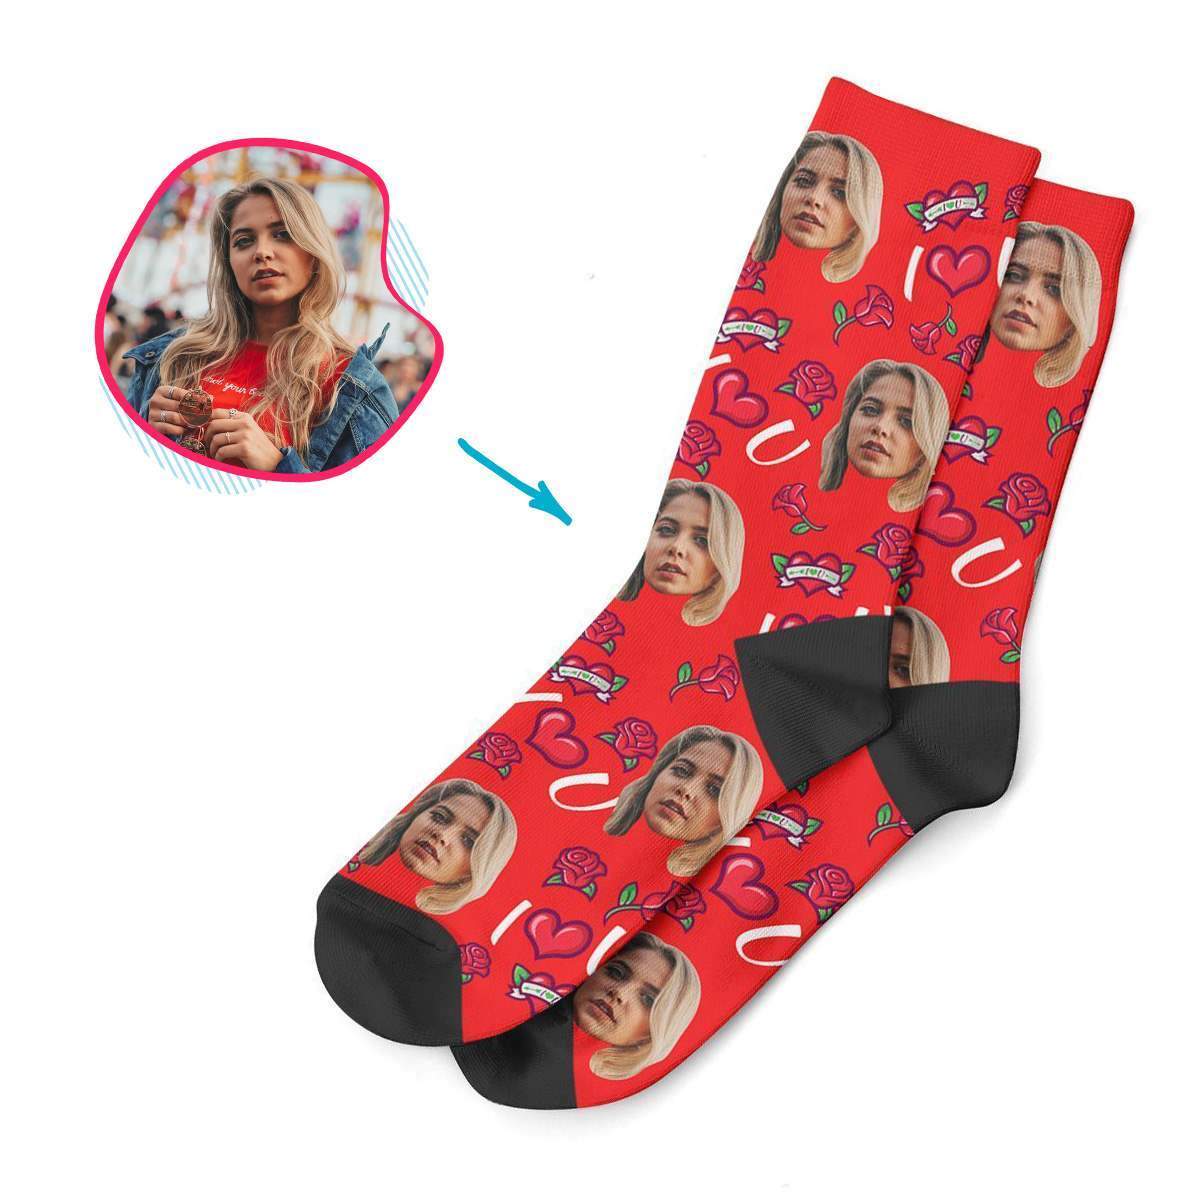 red Valentines socks personalized with photo of face printed on them